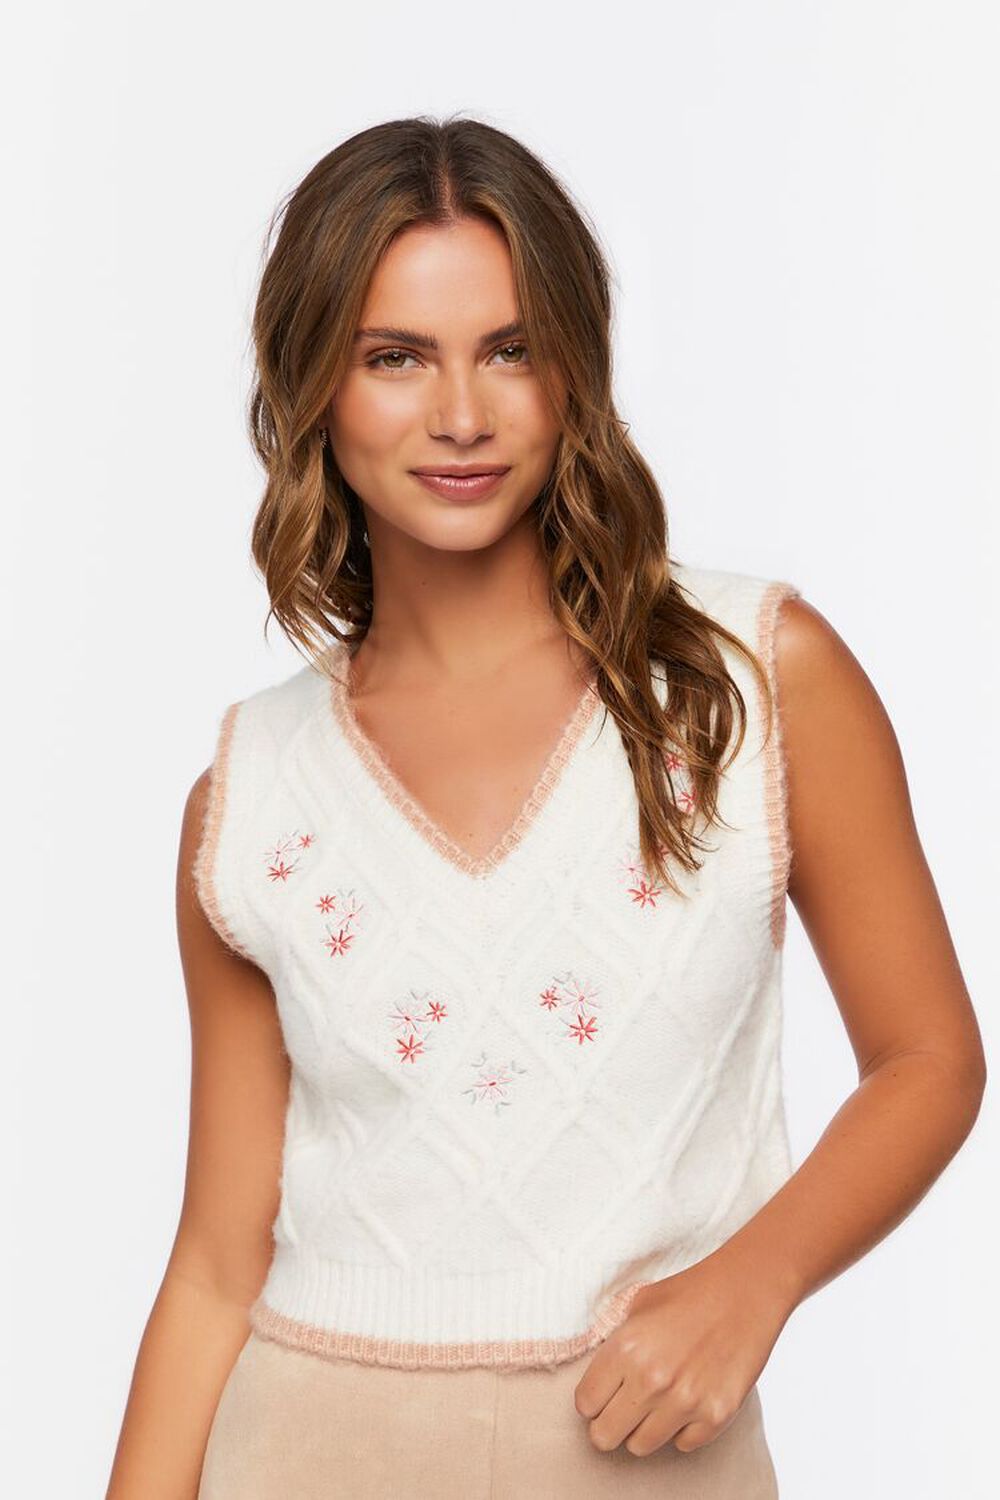 VANILLA/PINK Floral Embroidered Sweater Vest, image 1